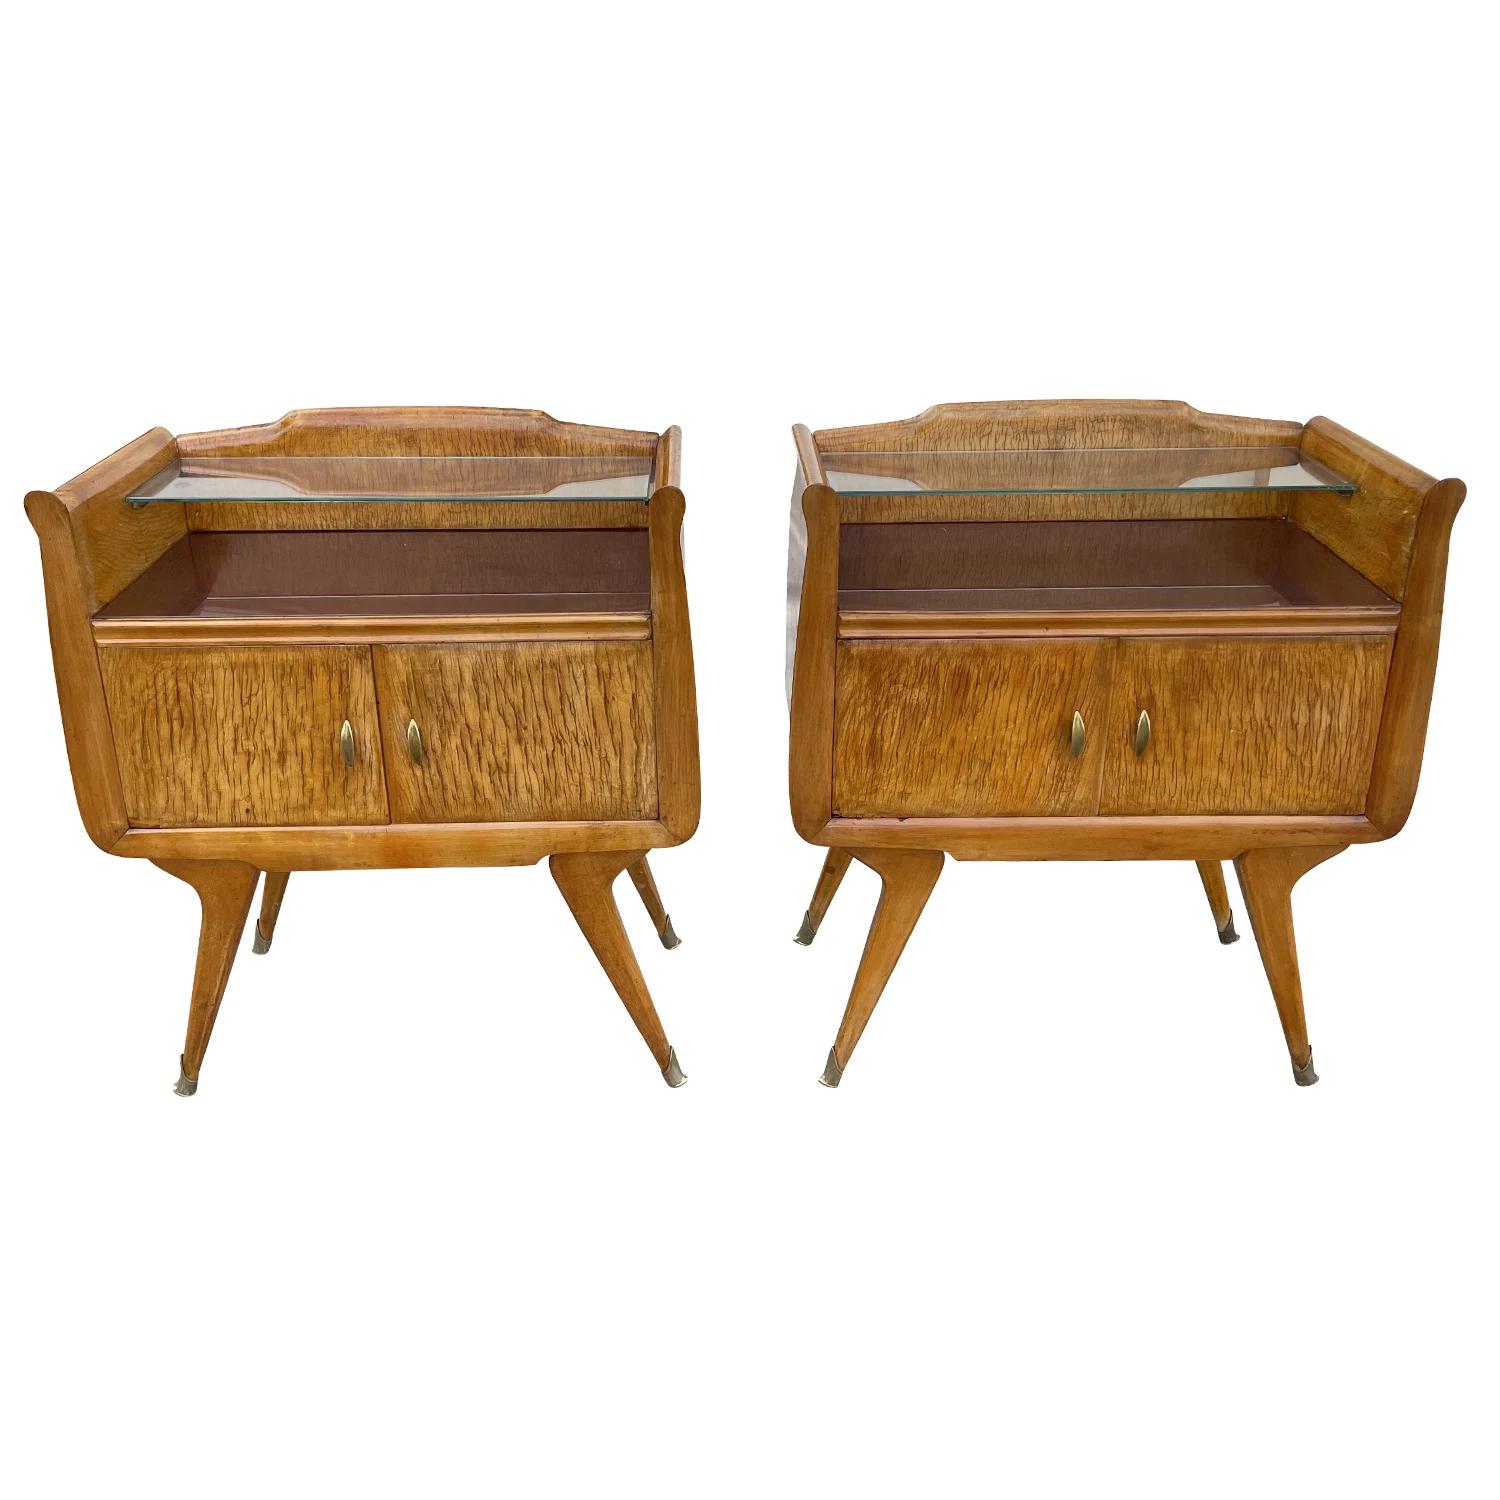 A vintage Mid-Century modern Italian pair of nightstands made of hand crafted polished Maplewood, designed by Paolo Buffa in good condition. The bed side tables are composed with a glass shelf and two small doors, detailed with its original brass